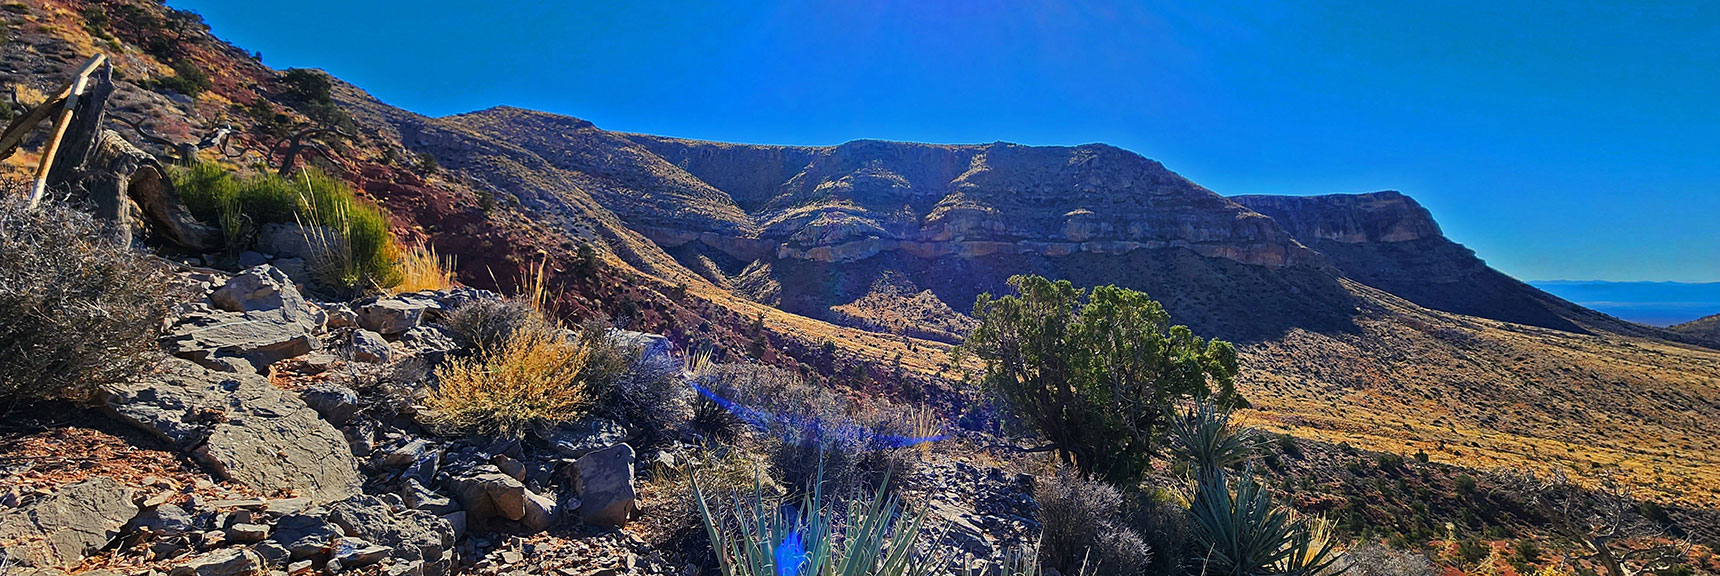 View to the First of 4 Canyons from North to South. | Landmark Bluff Circuit | Lovell Canyon, Nevada